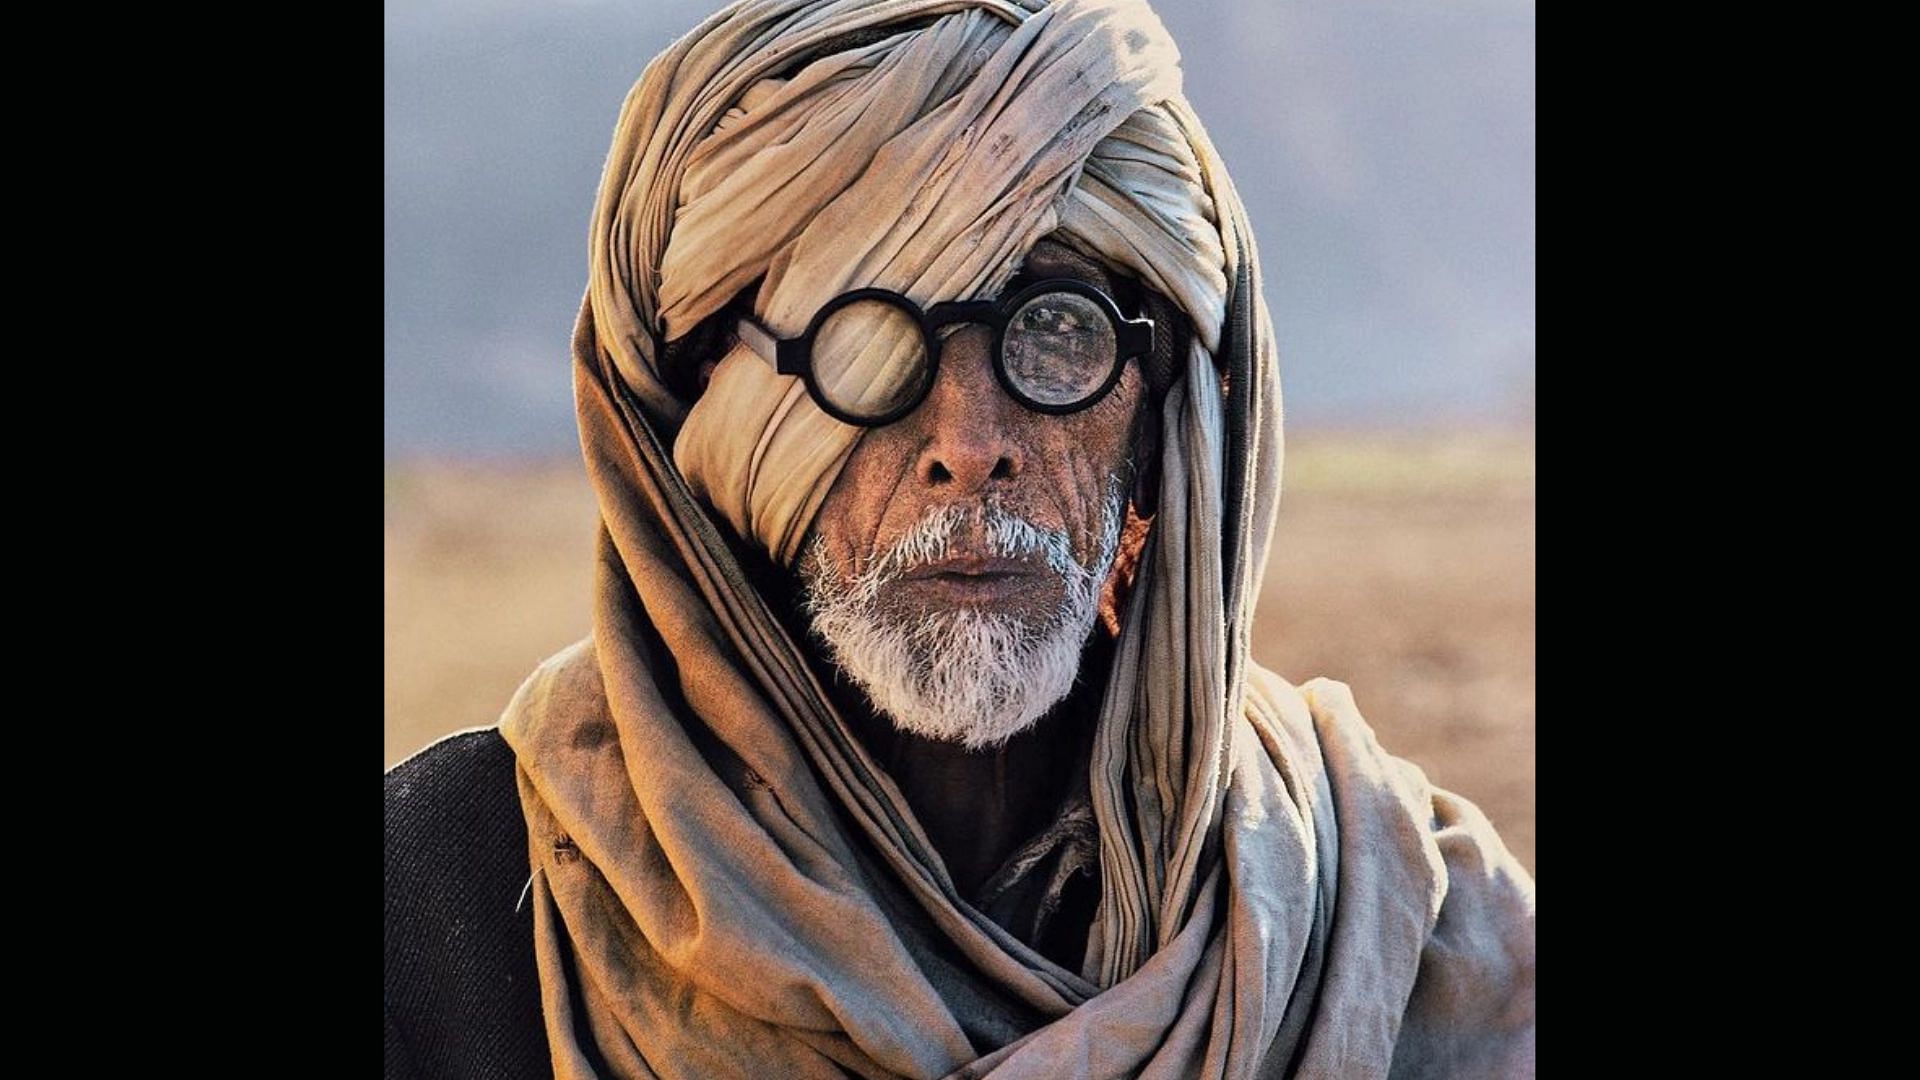 <div class="paragraphs"><p>Afghan refugee's striking resemblance to Amitabh Bachchan stumps netizens.</p></div>